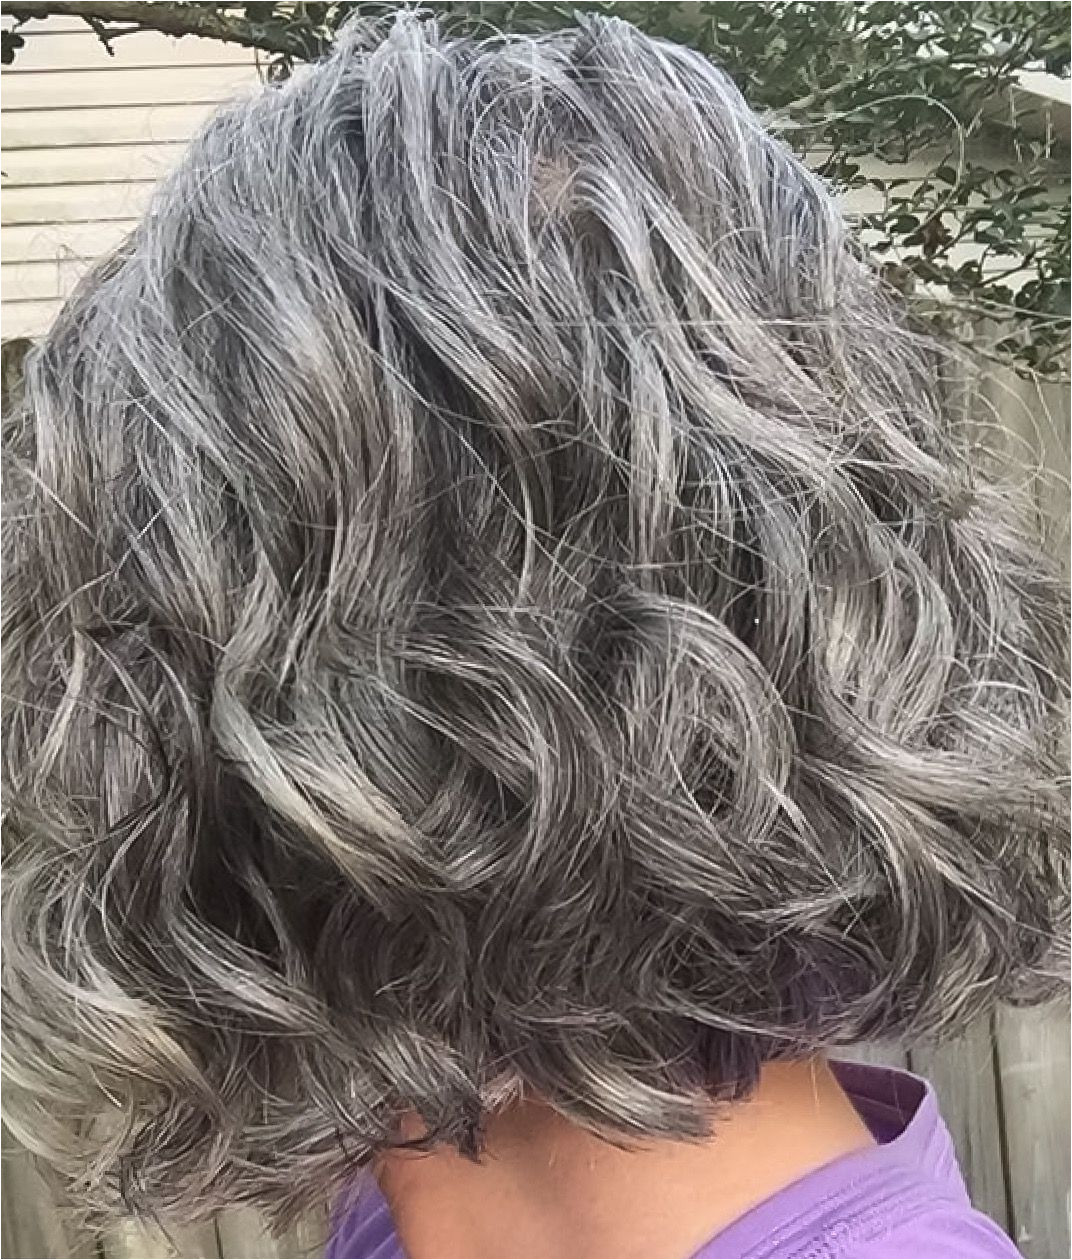 Hairstyles Over 50 · Curly gray hair Grey Curly Hair Short Grey Hair Wavy Hair Curly Hair